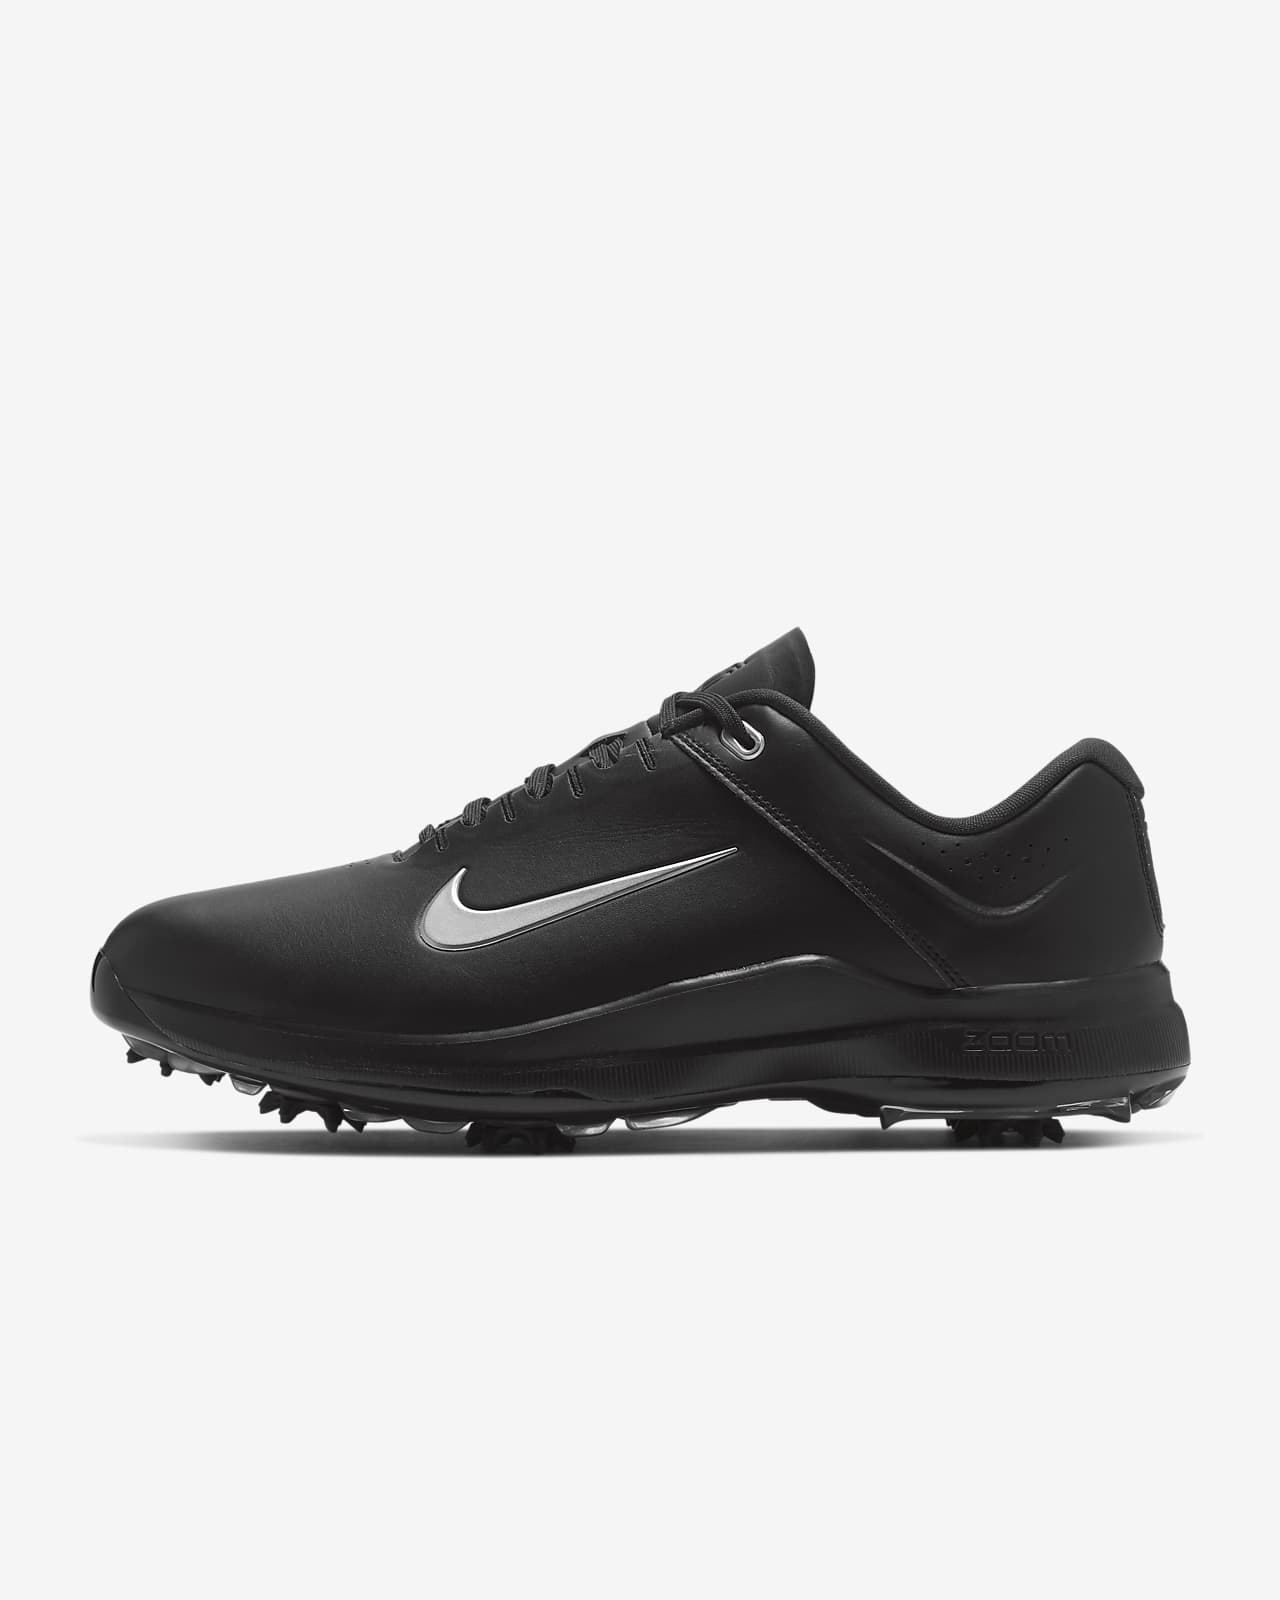 New Nike Golf Air Zoom TW Tiger Woods 20 Golf Shoes White CI4509-100 ...